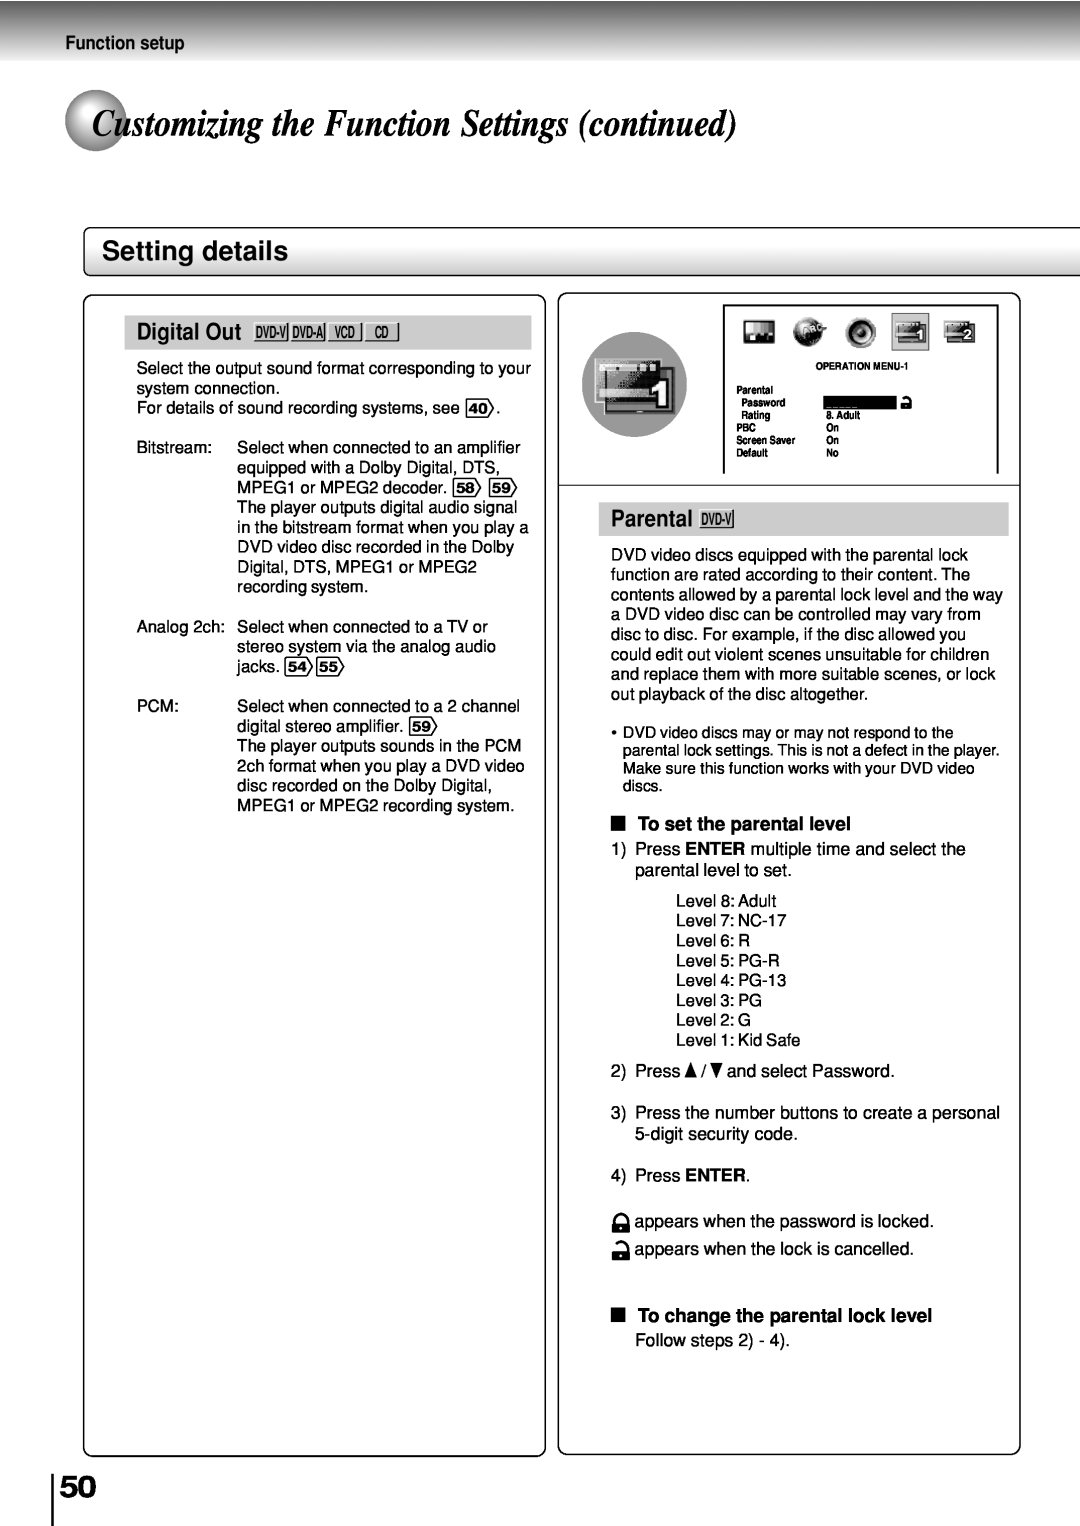 Toshiba SD-P2800SE Customizing the Function Settings continued, Setting details, Parental DVD-V, Function setup 